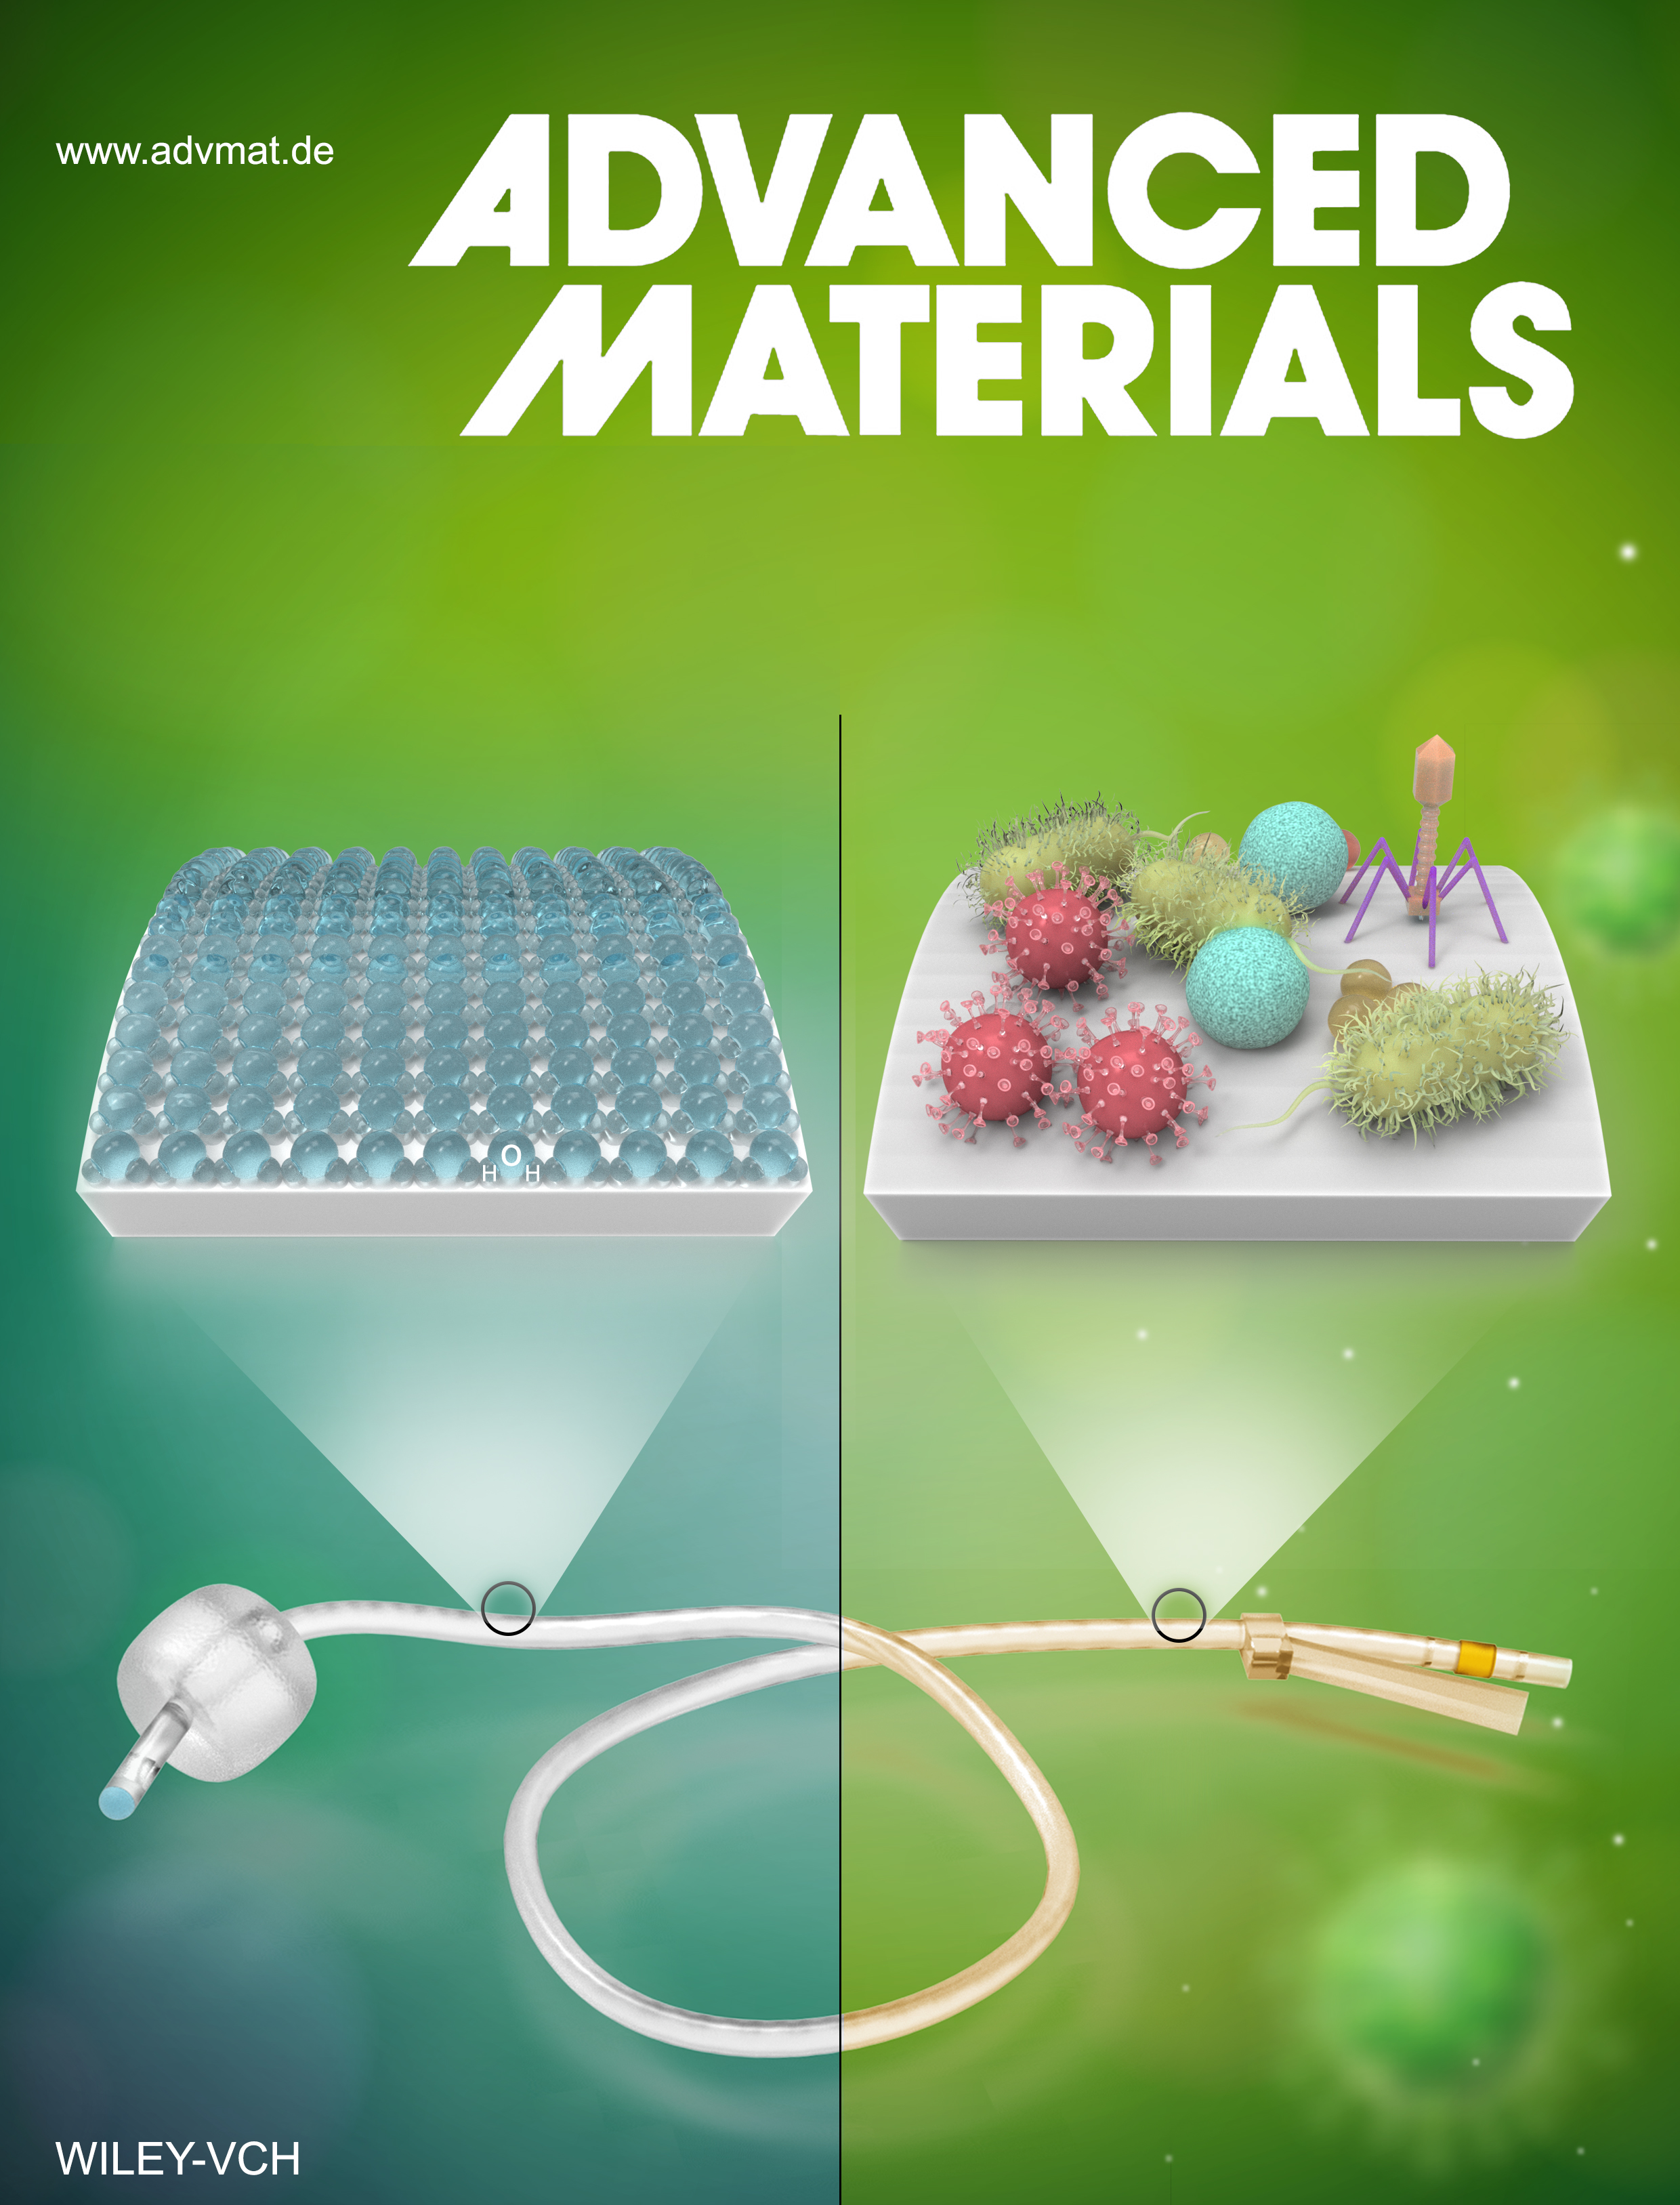 A green journal cover with the text "Advanced Materials" depicts a clean surface and a surface covered in a rendering of bacteria